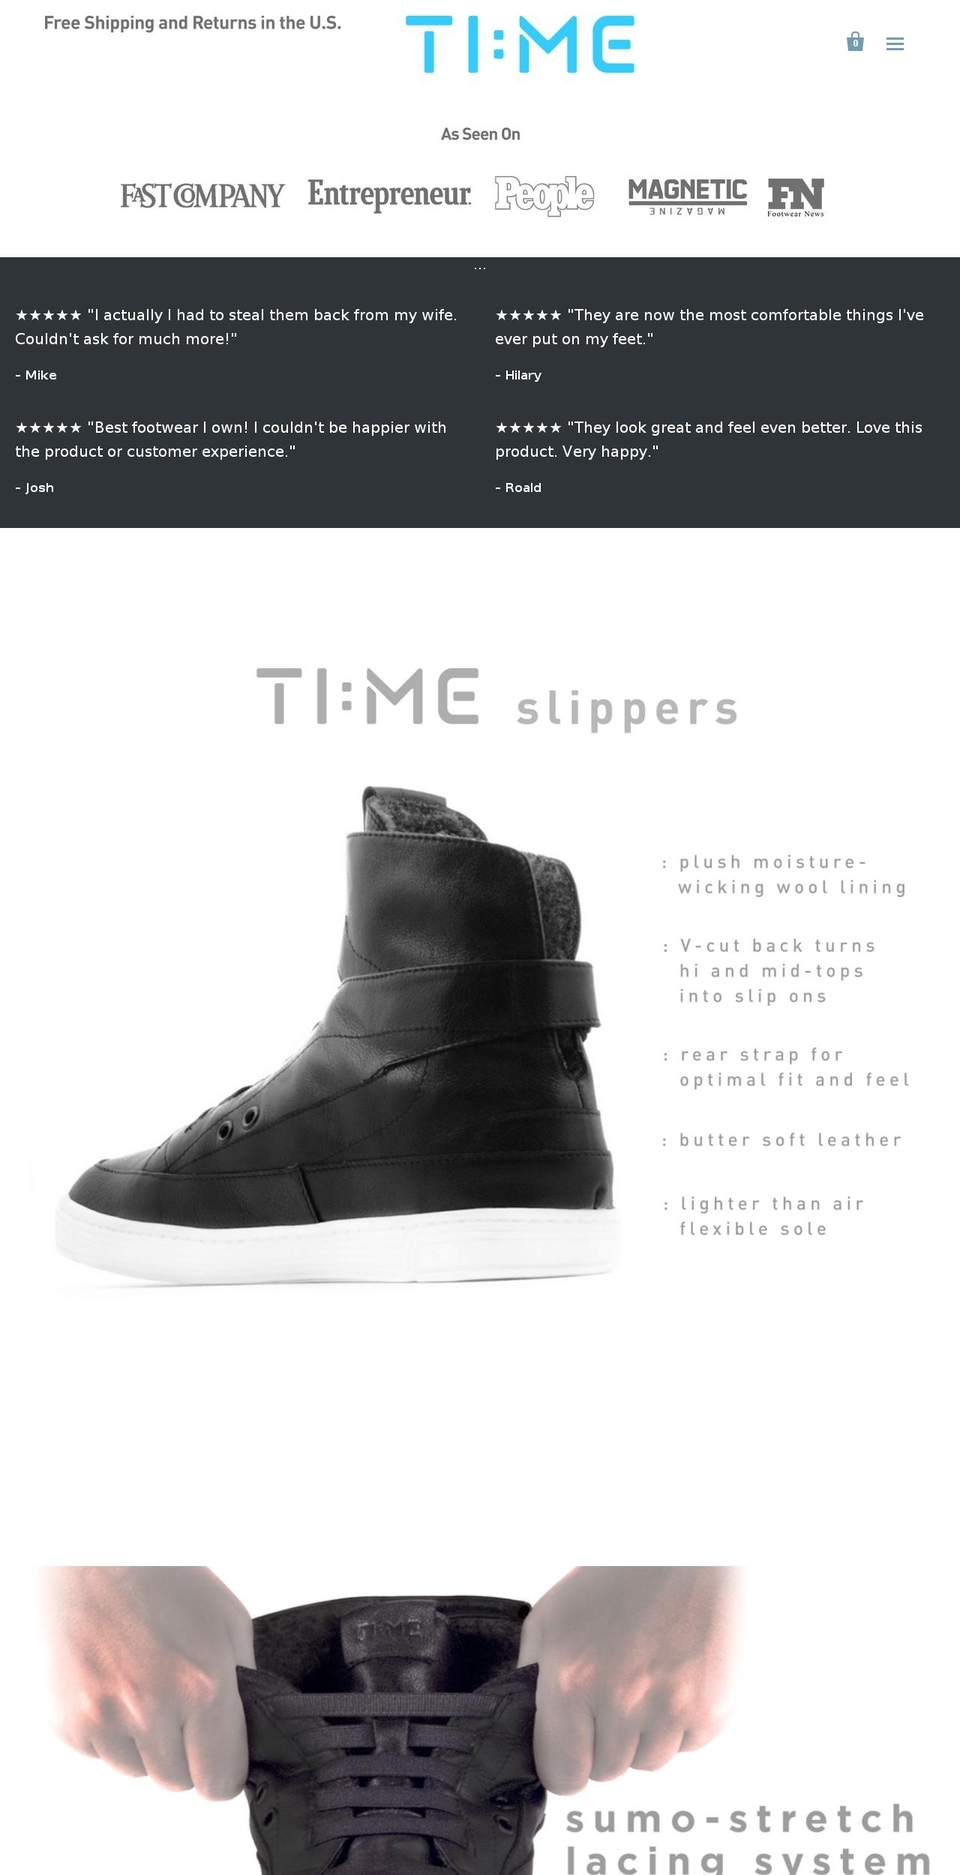 Impulse Shopify theme site example timeslippers.com